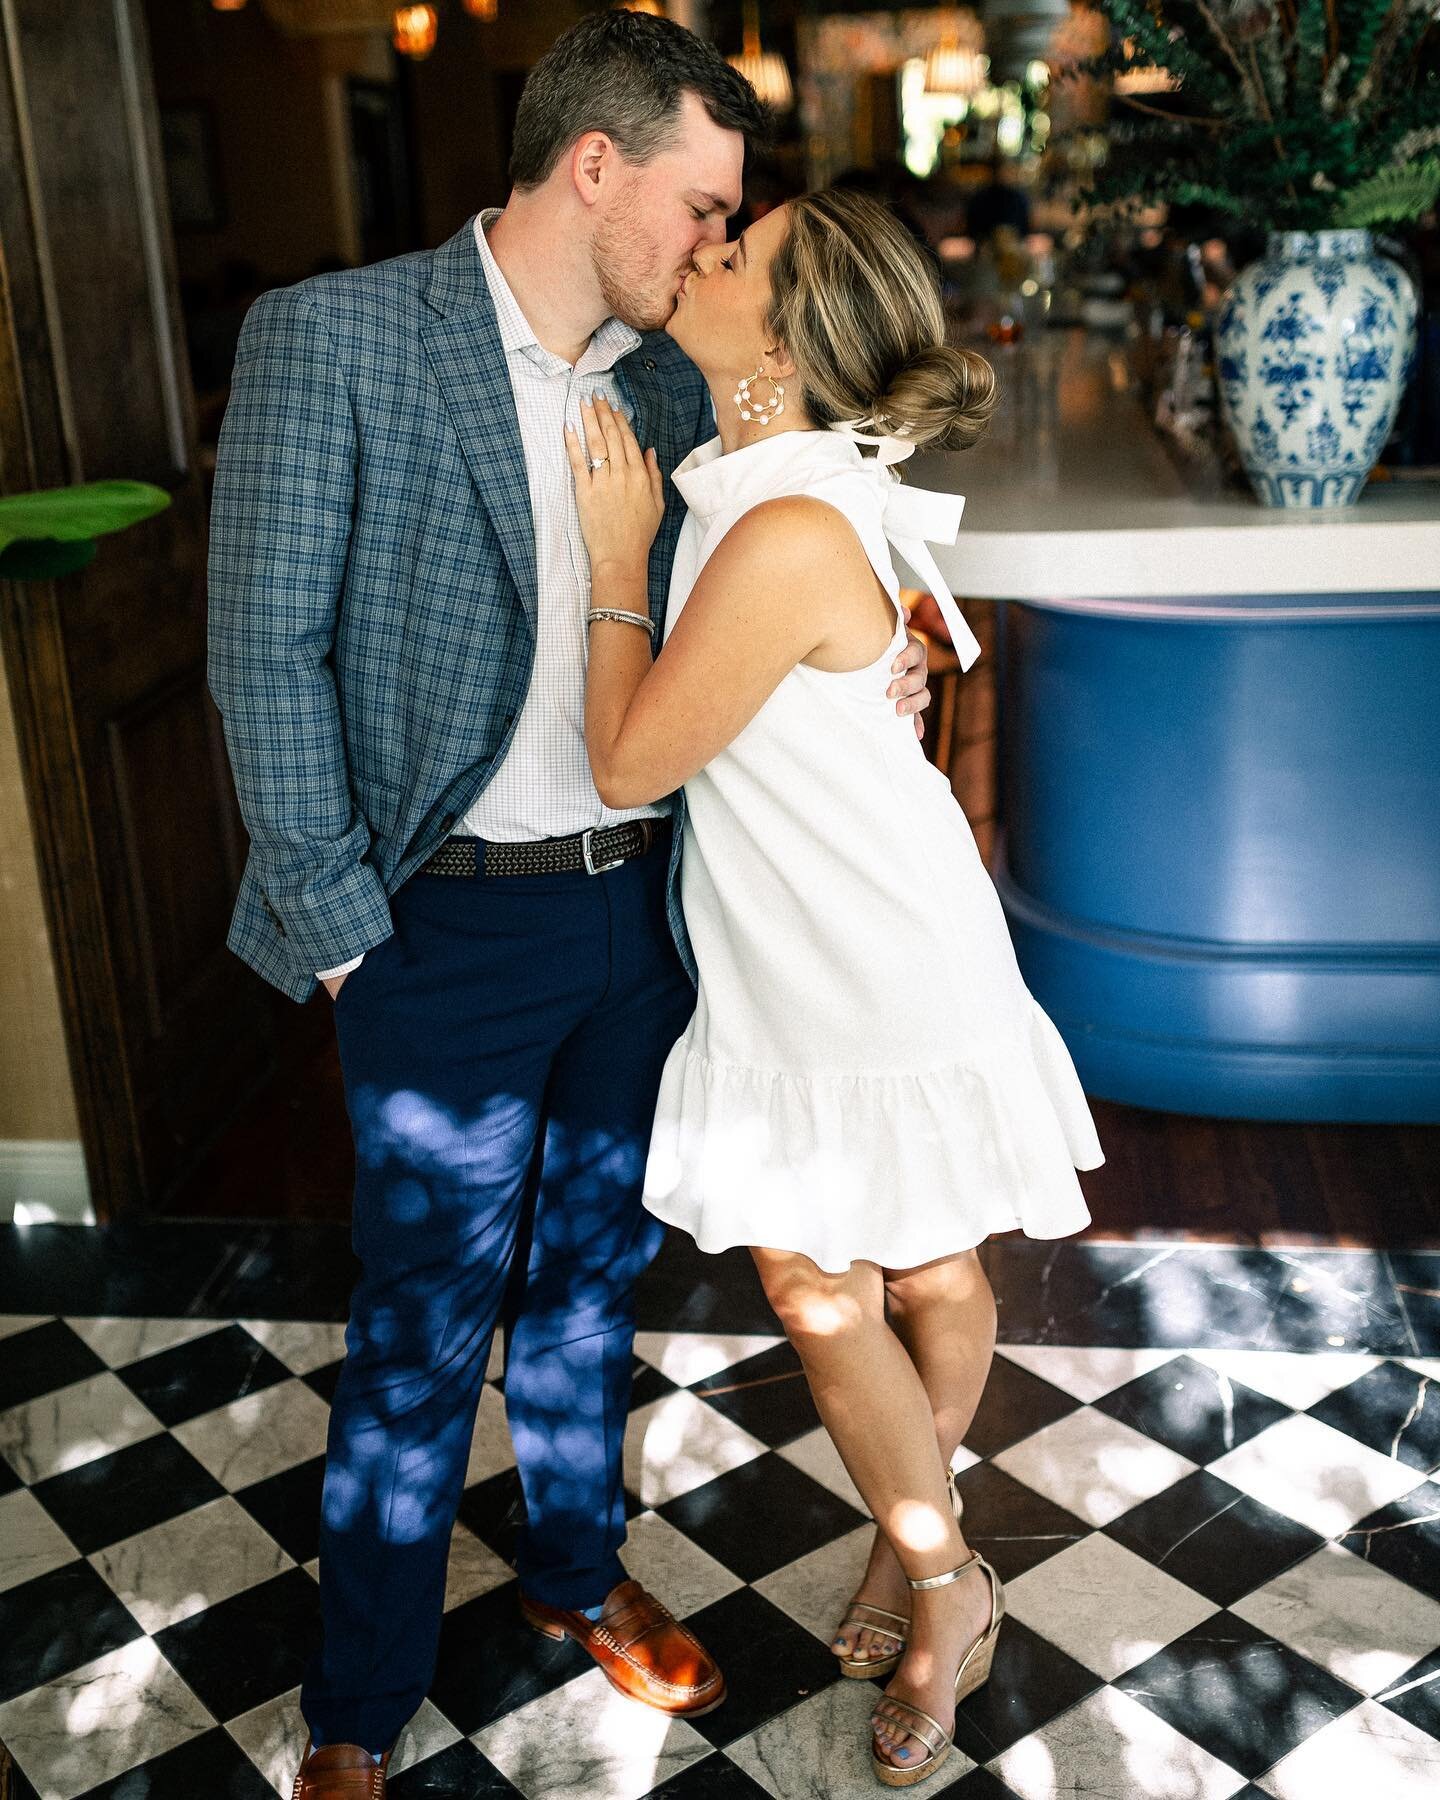 Date night with Heather &amp; Dillon!
&bull;
Preview from a recent session in St. Simons Island at @dorothysssi - the coolest place- thank you guys so much for the chance to shoot in your beautiful restaurant!

&bull;
#stsimonsislandphotographer #ame